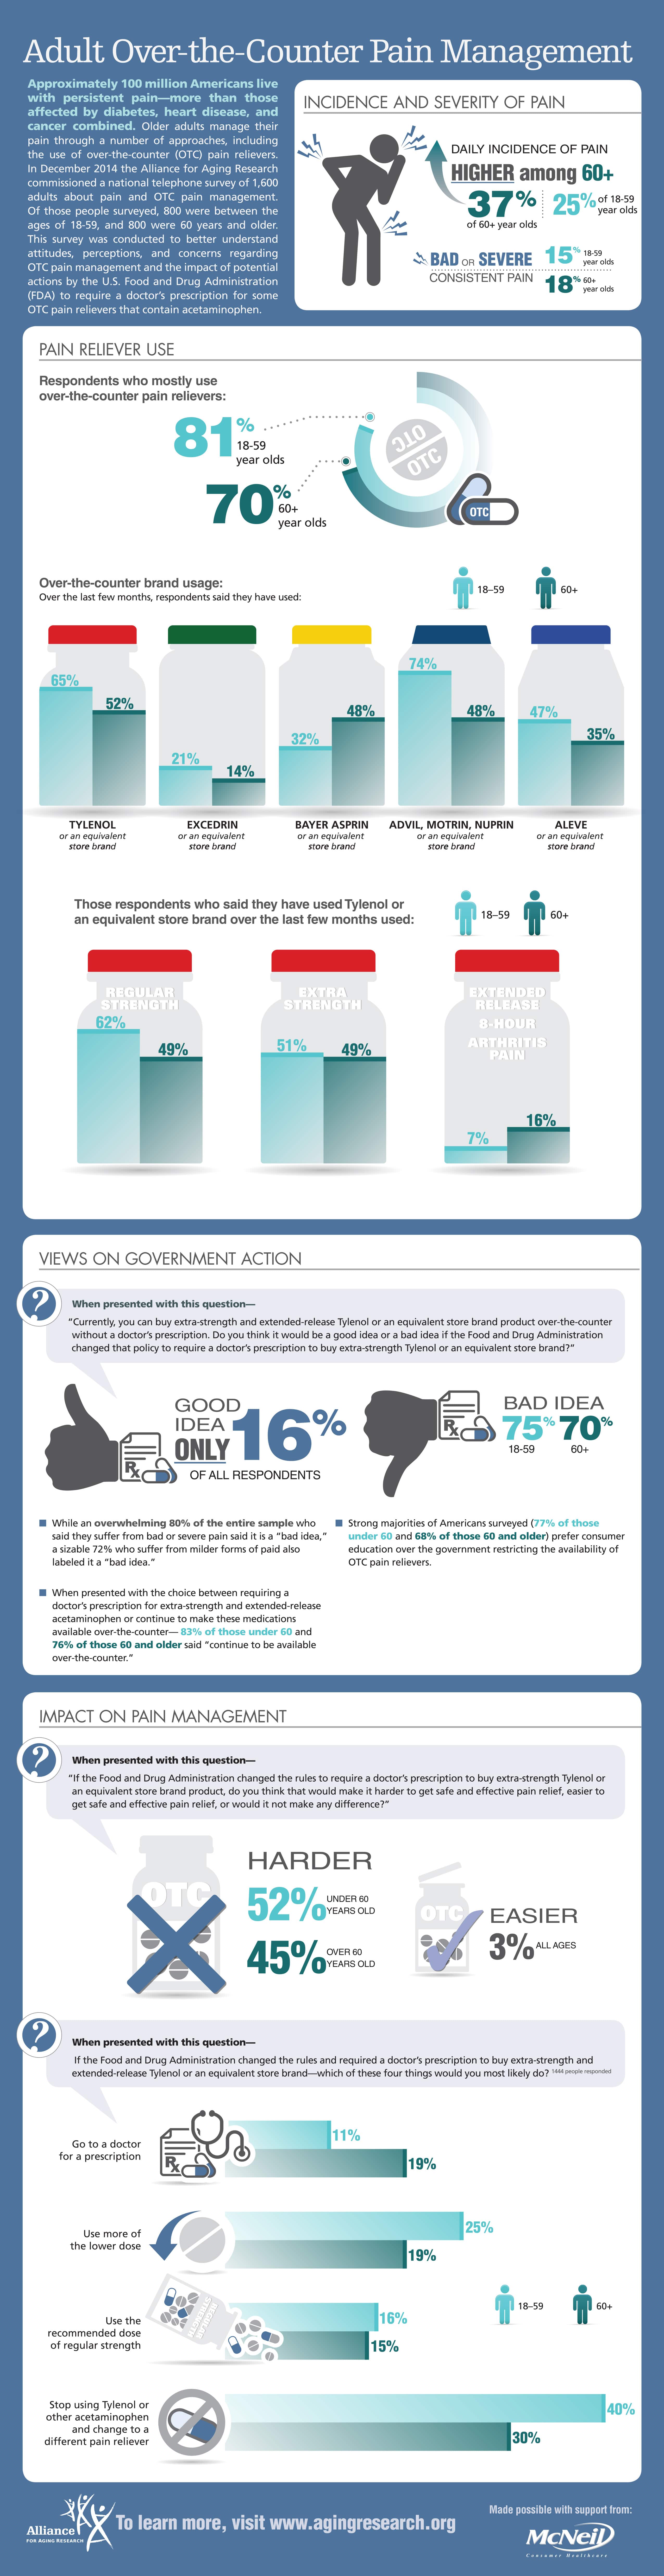 Infographic on adult over-the-counter pain management.